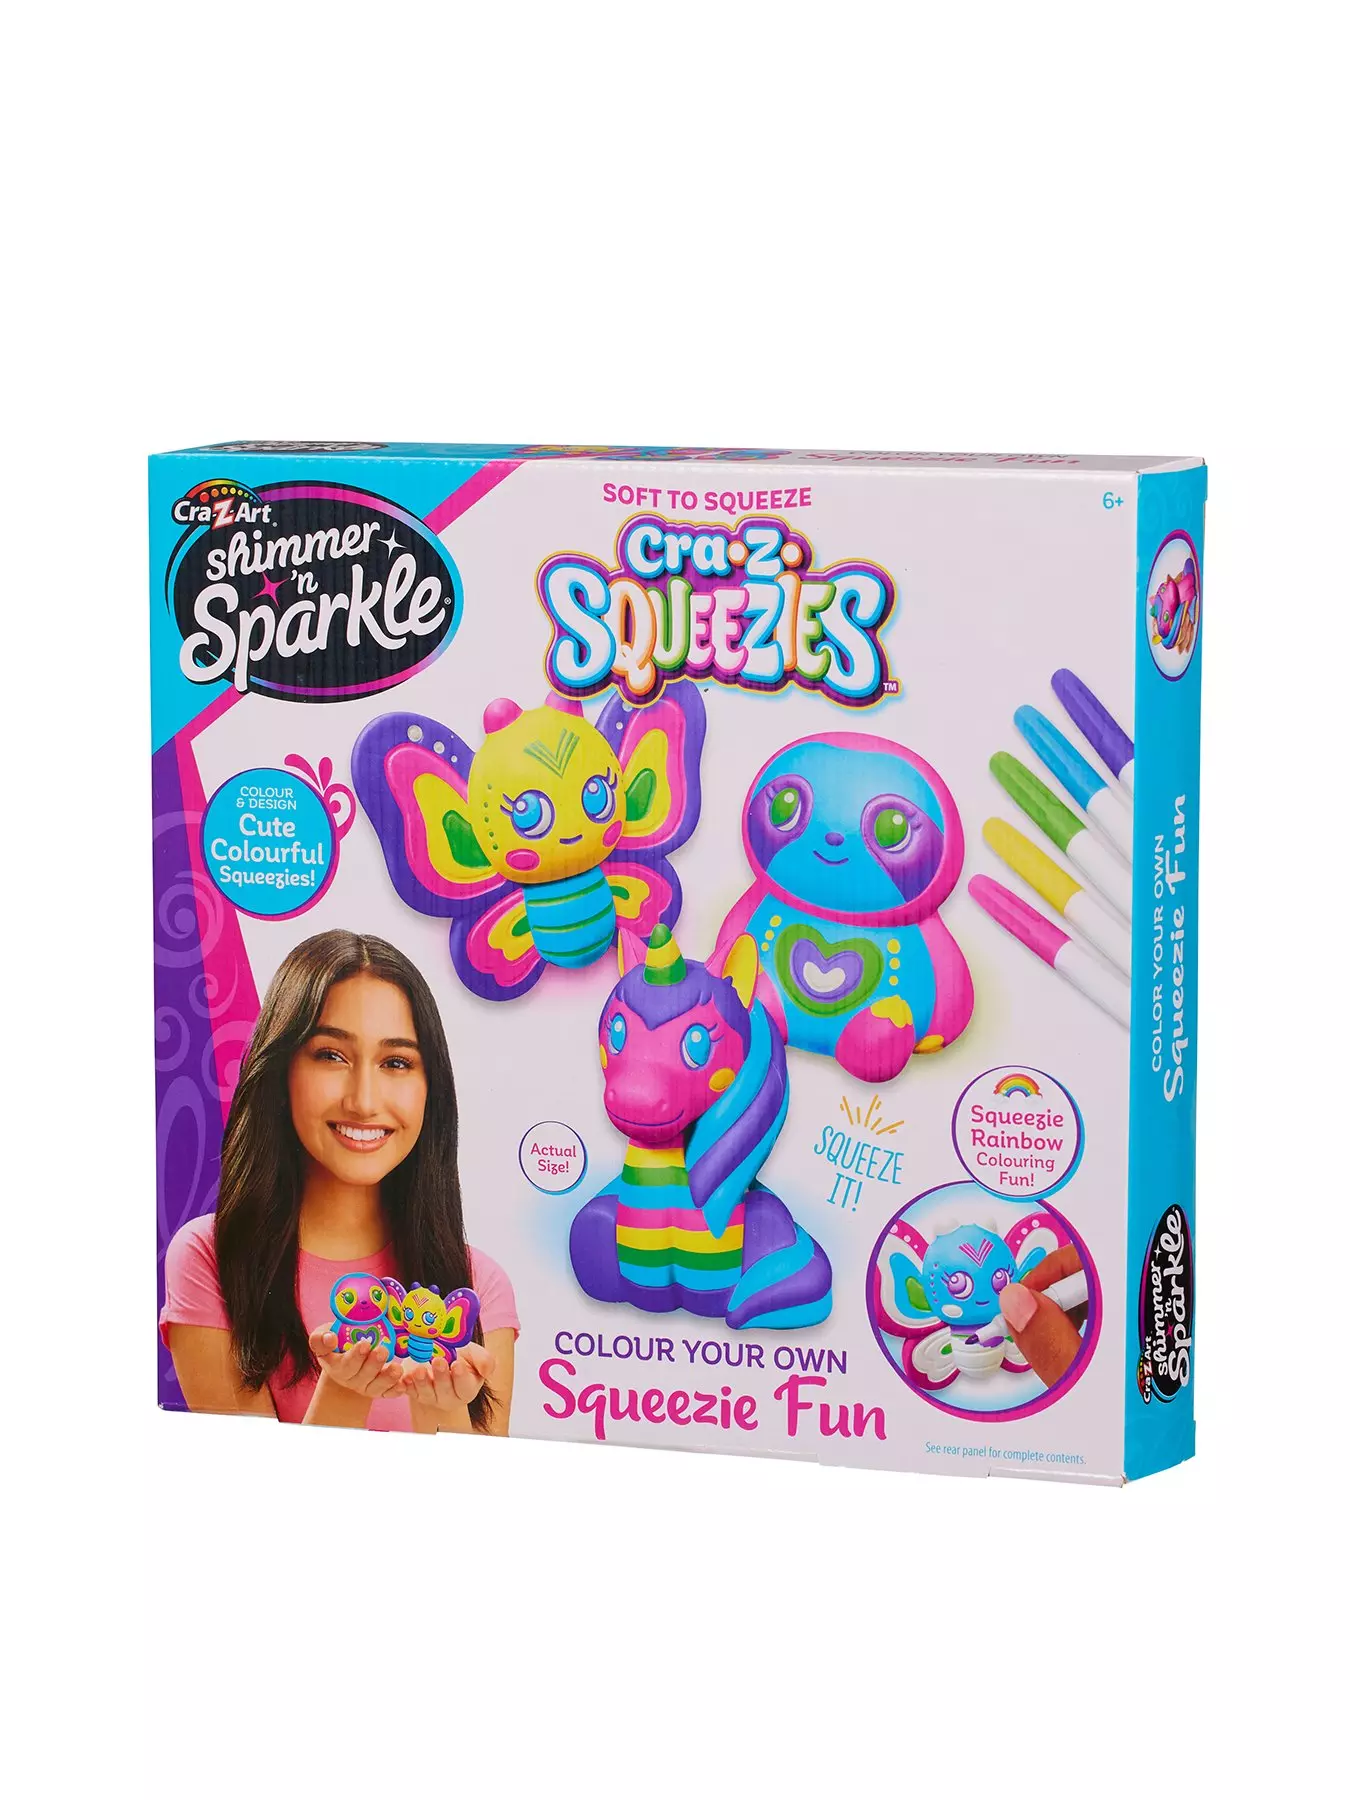 https://media.very.co.uk/i/very/VM1R0_SQ2_0000000088_NO_COLOR_SLf/shimmer-sparkle-shimmer-n-sparkle-colour-your-own-squeezie-fun.jpg?$180x240_retinamobilex2$&fmt=webp